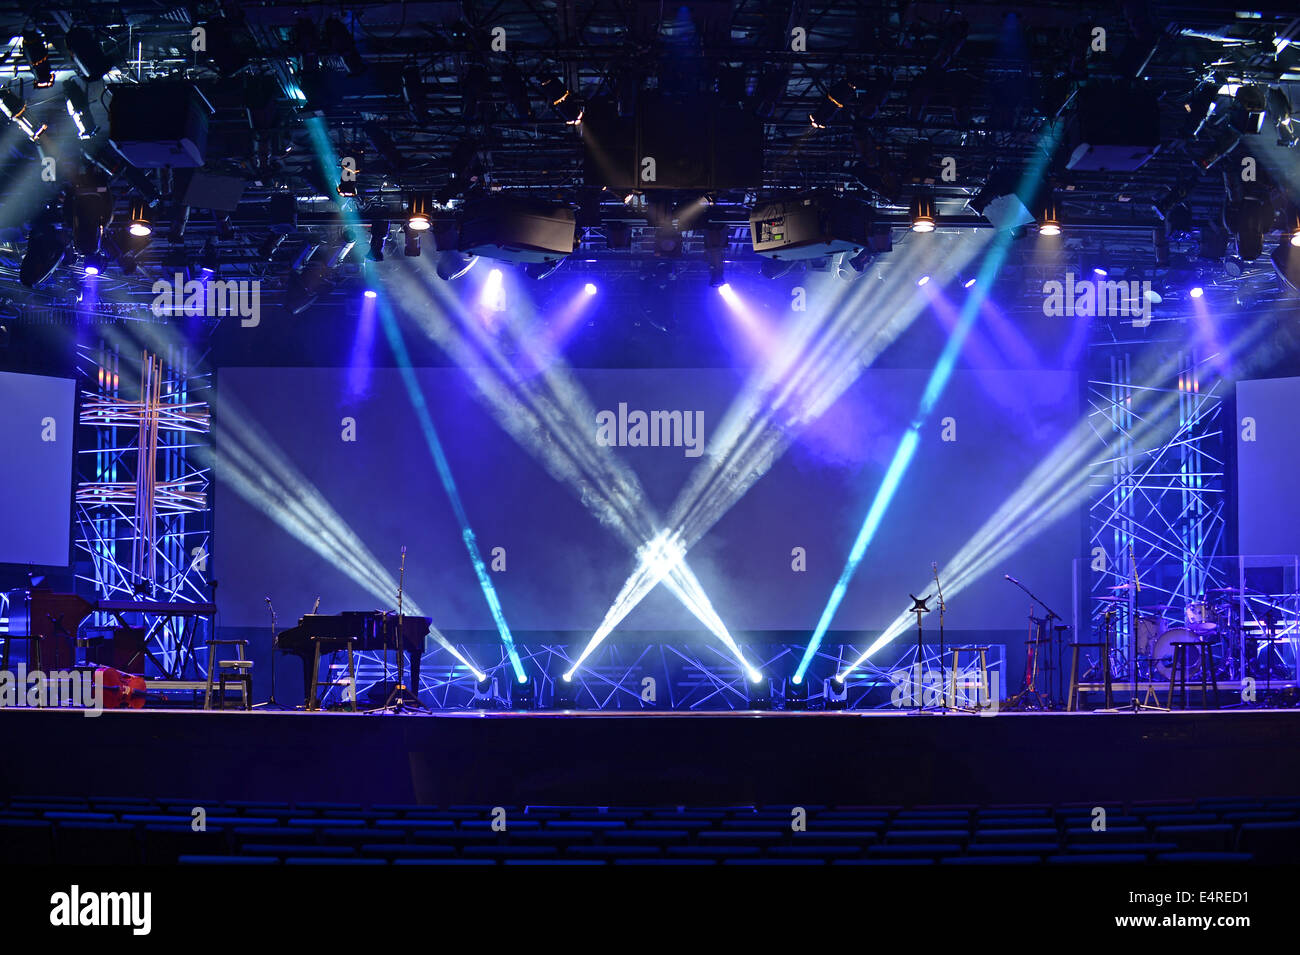 Stage lights with musical instruments ready for concert Stock Photo